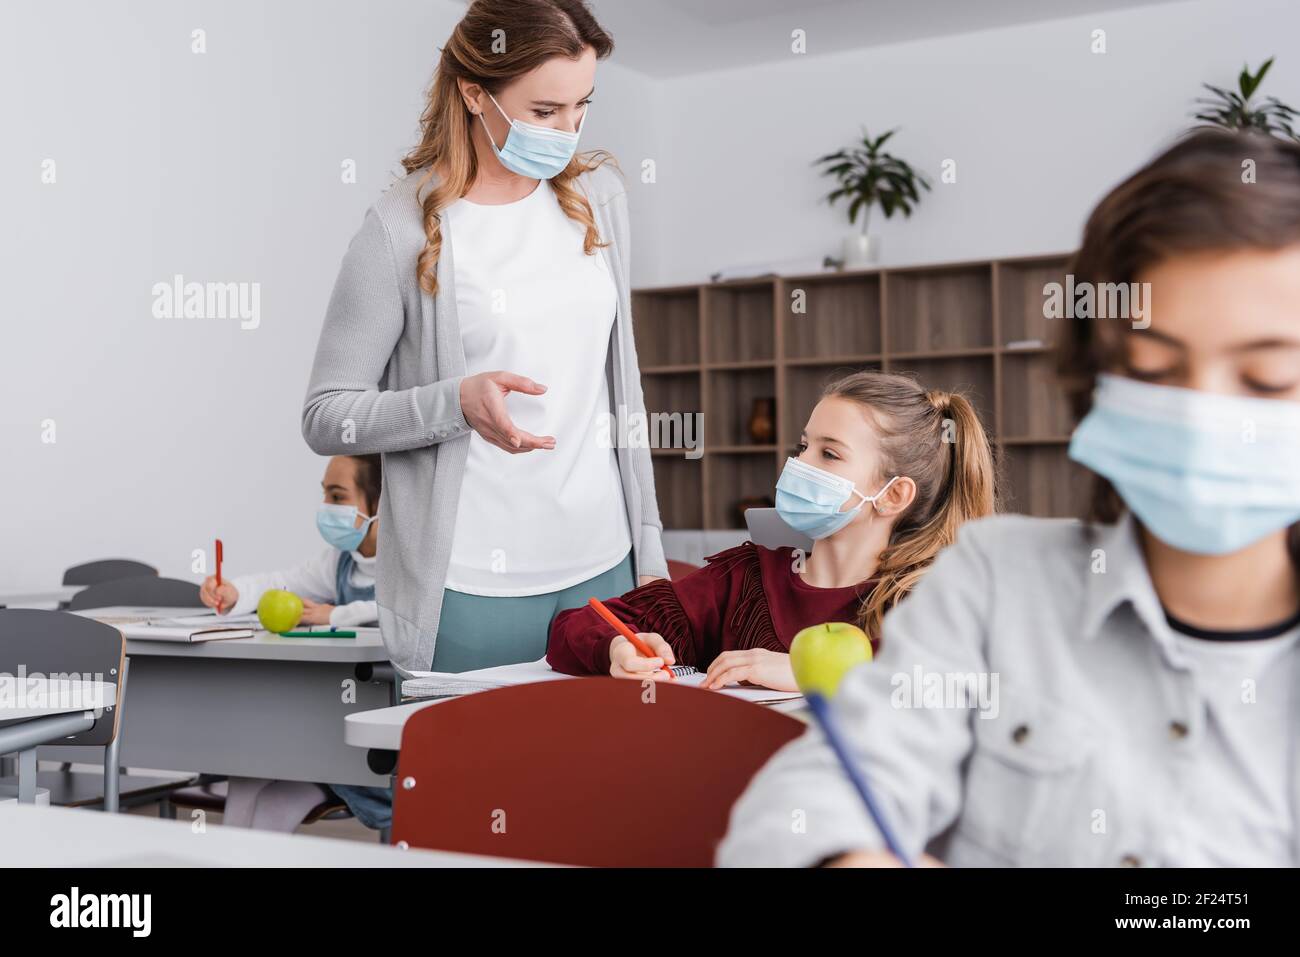 teacher in medical mask pointing with finger near girl during lesson Stock Photo